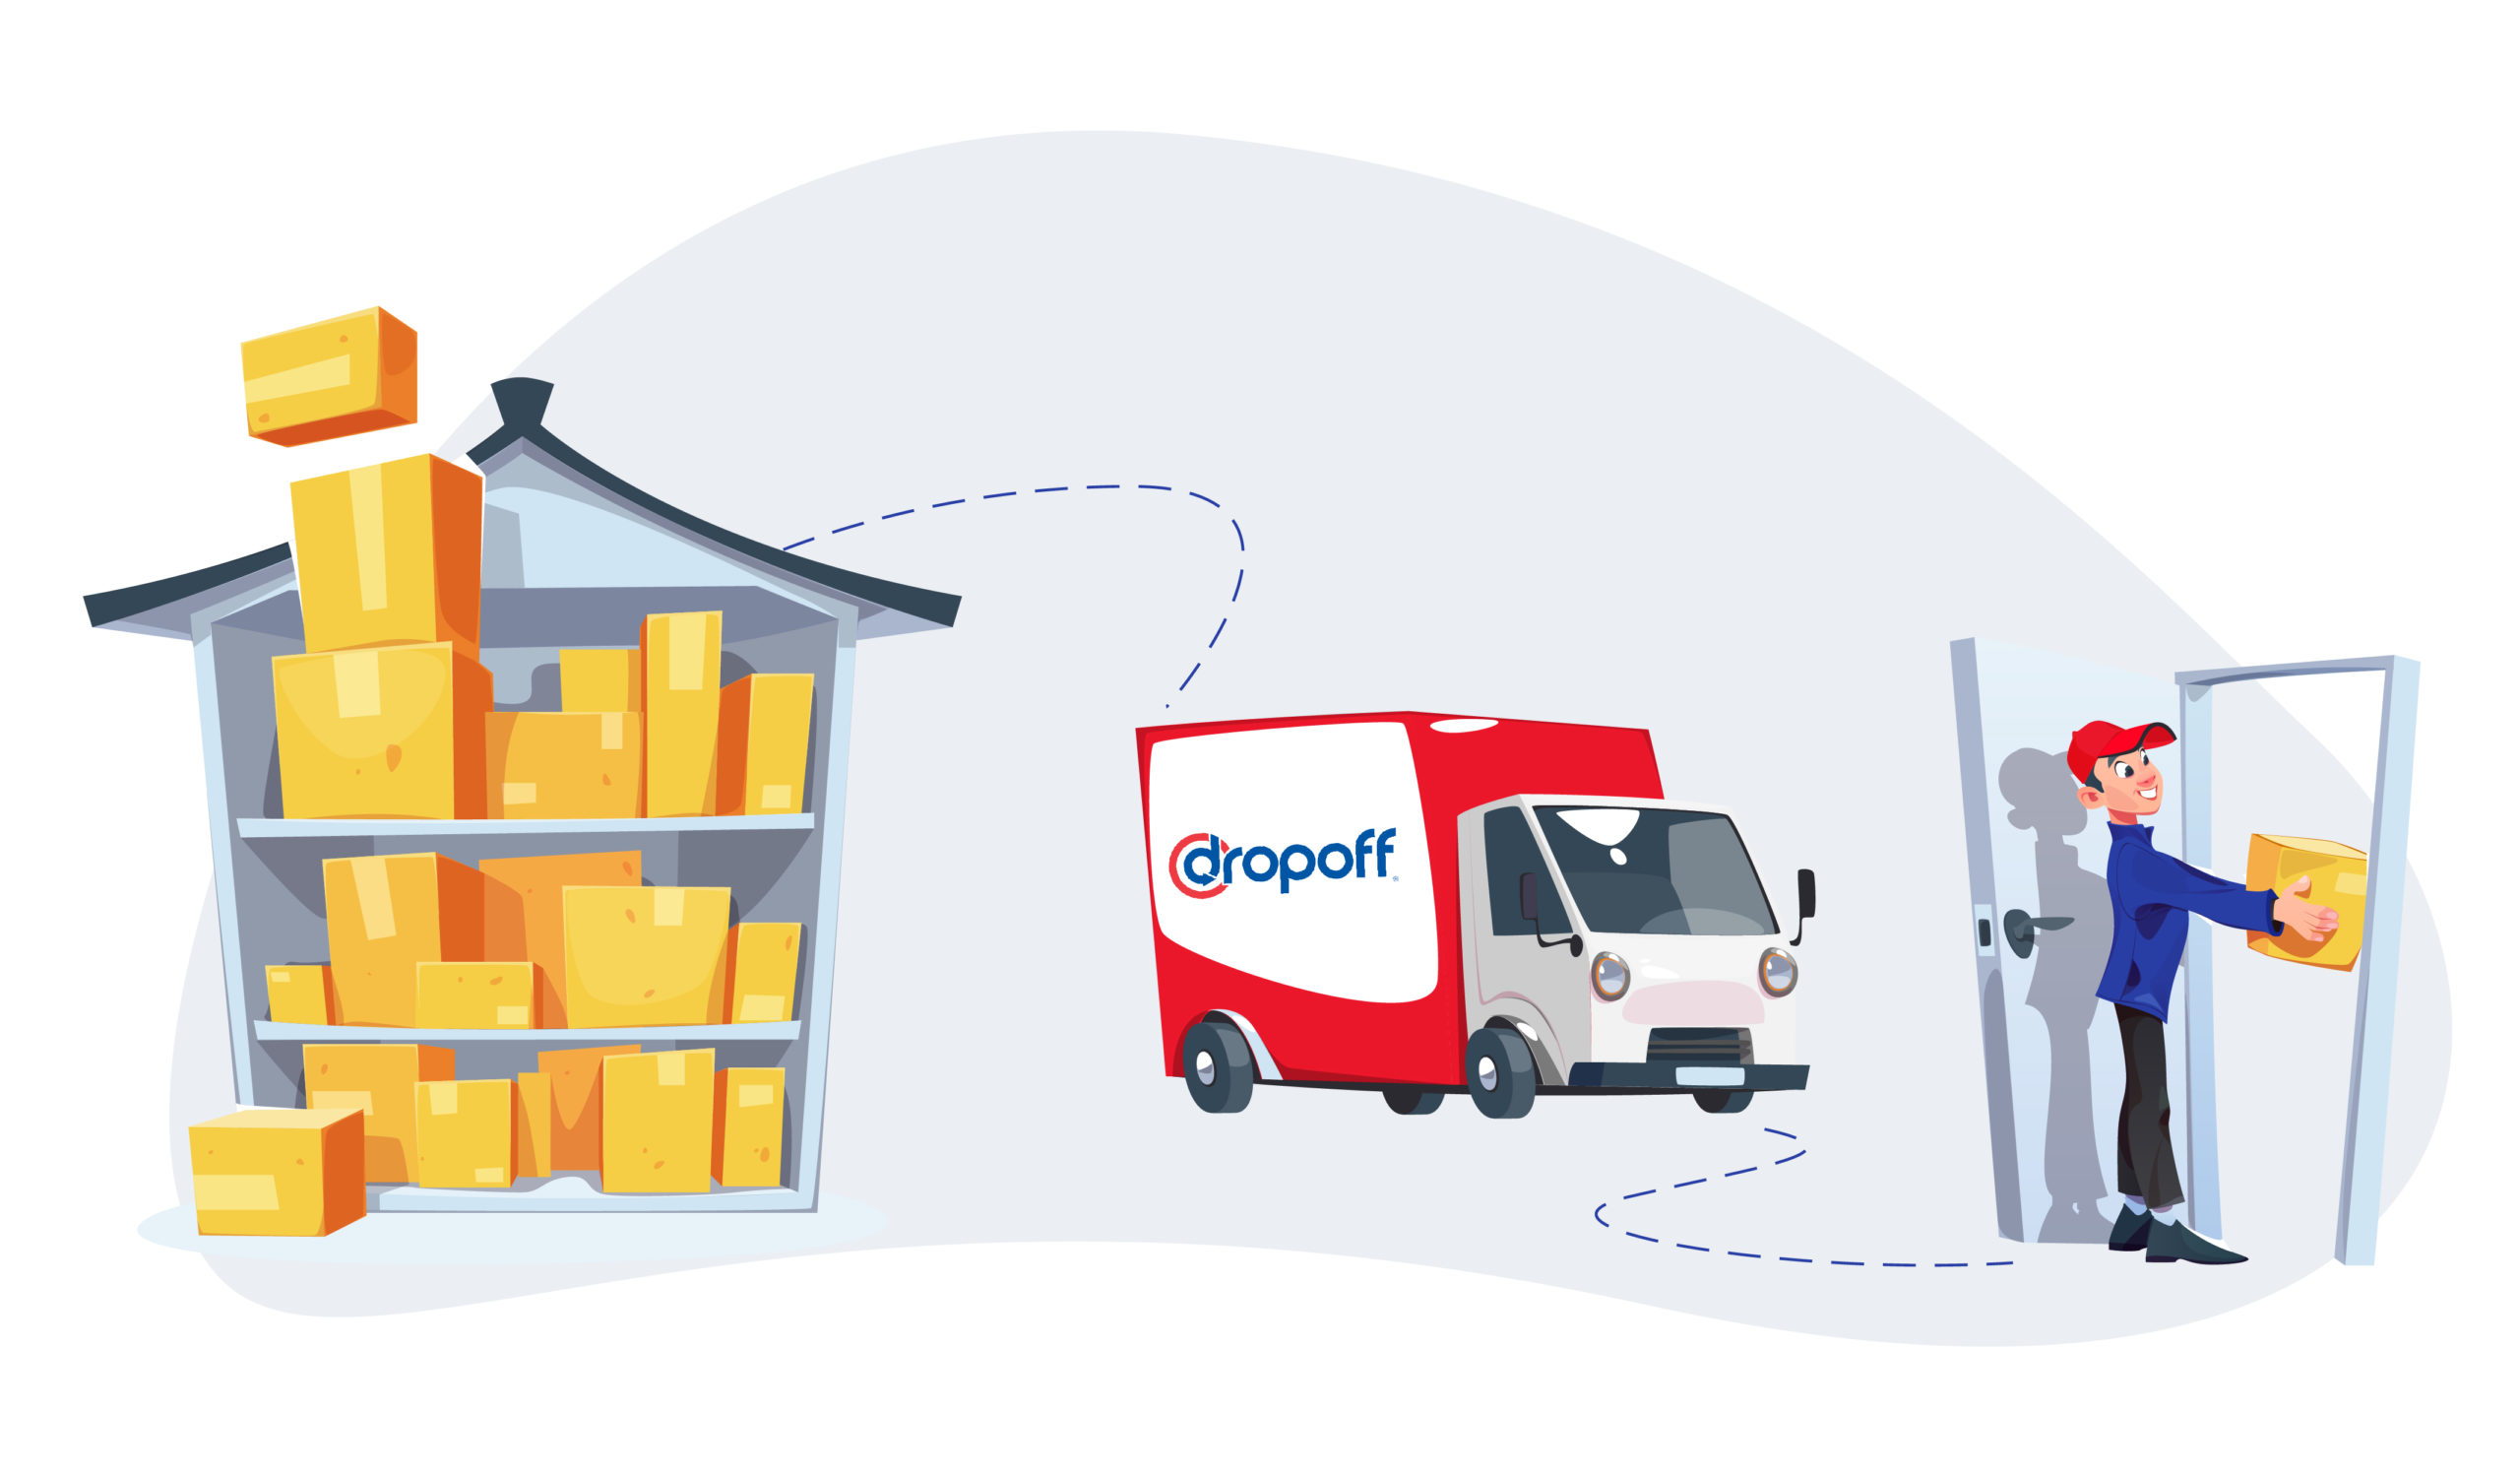 Doorstep Delivery makes shopping worry-free.